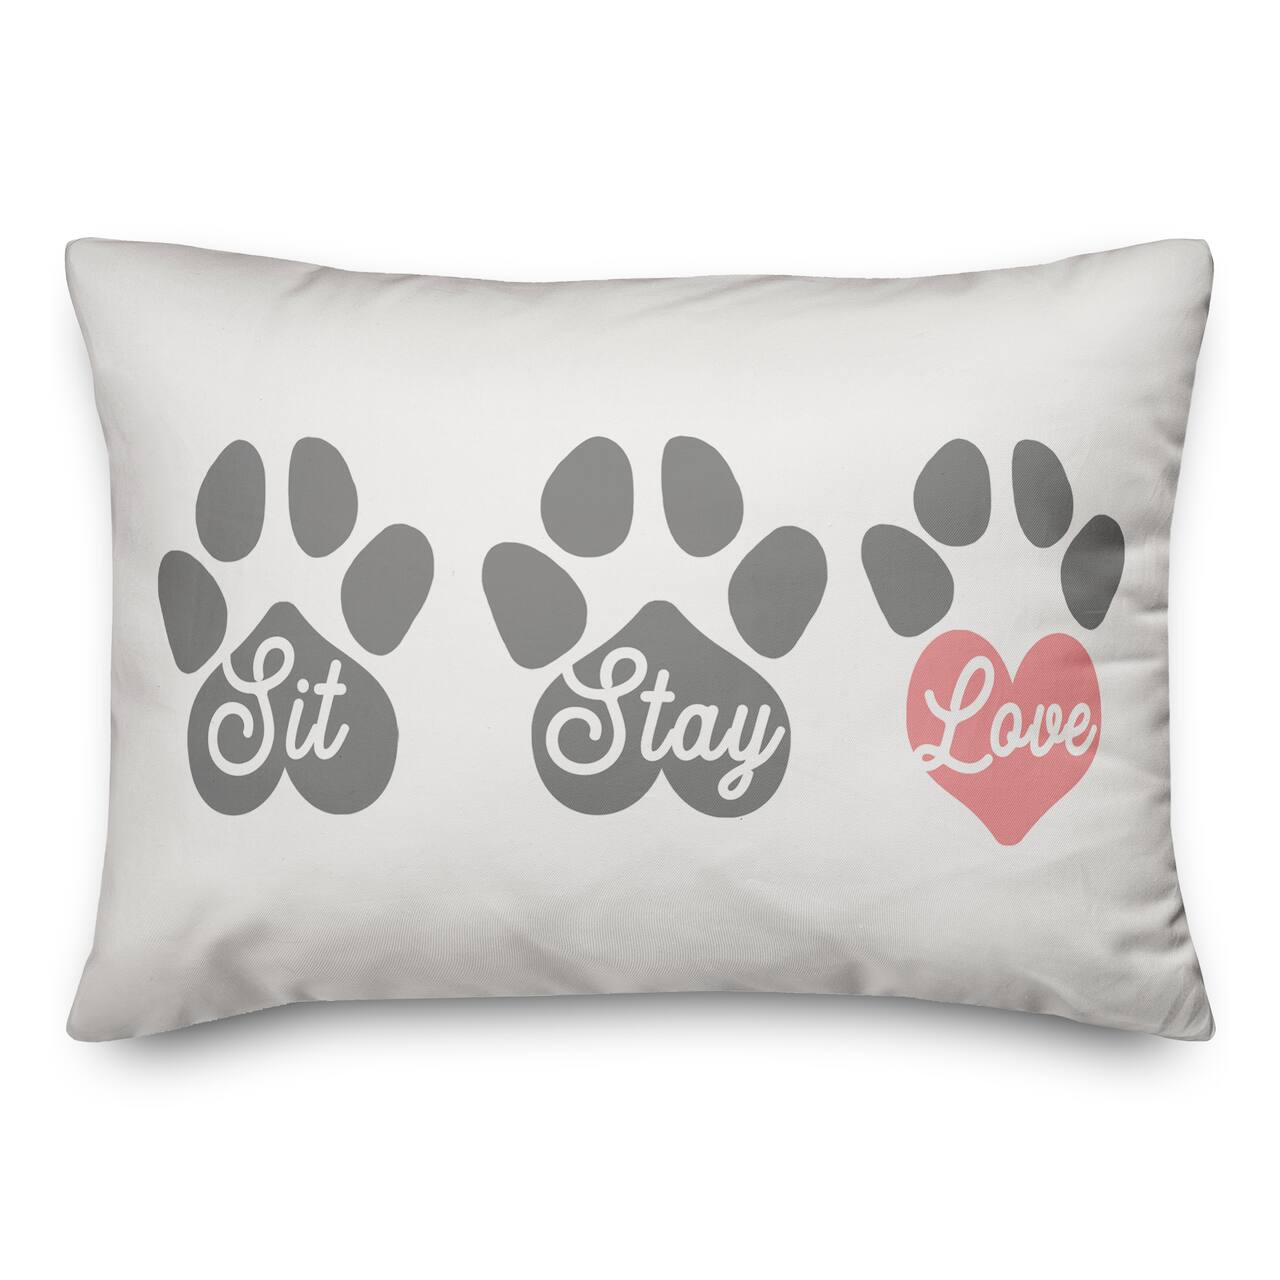 Sit Stay Love Throw Pillow